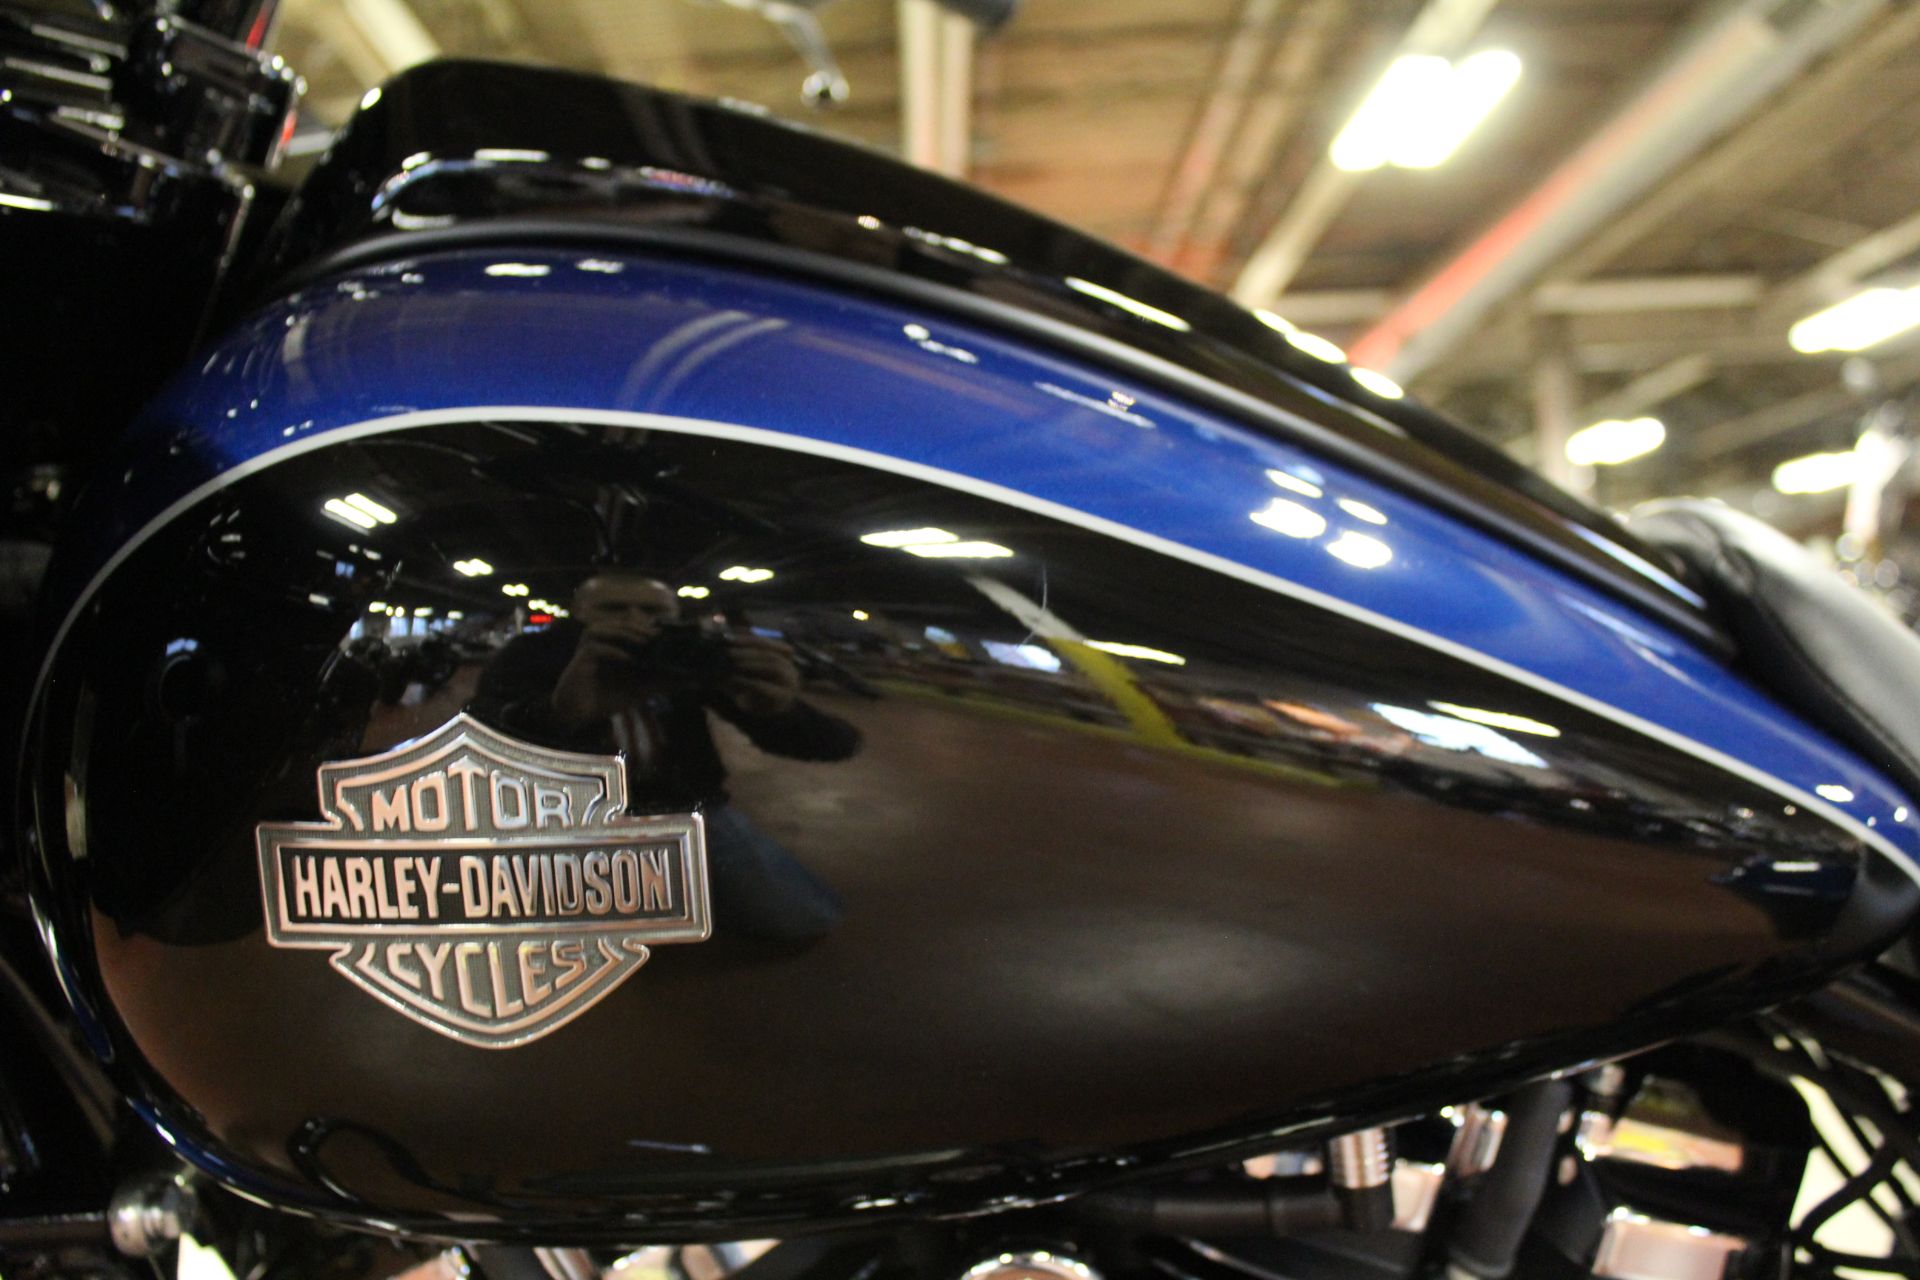 2022 Harley-Davidson Road Glide® Special in New London, Connecticut - Photo 11